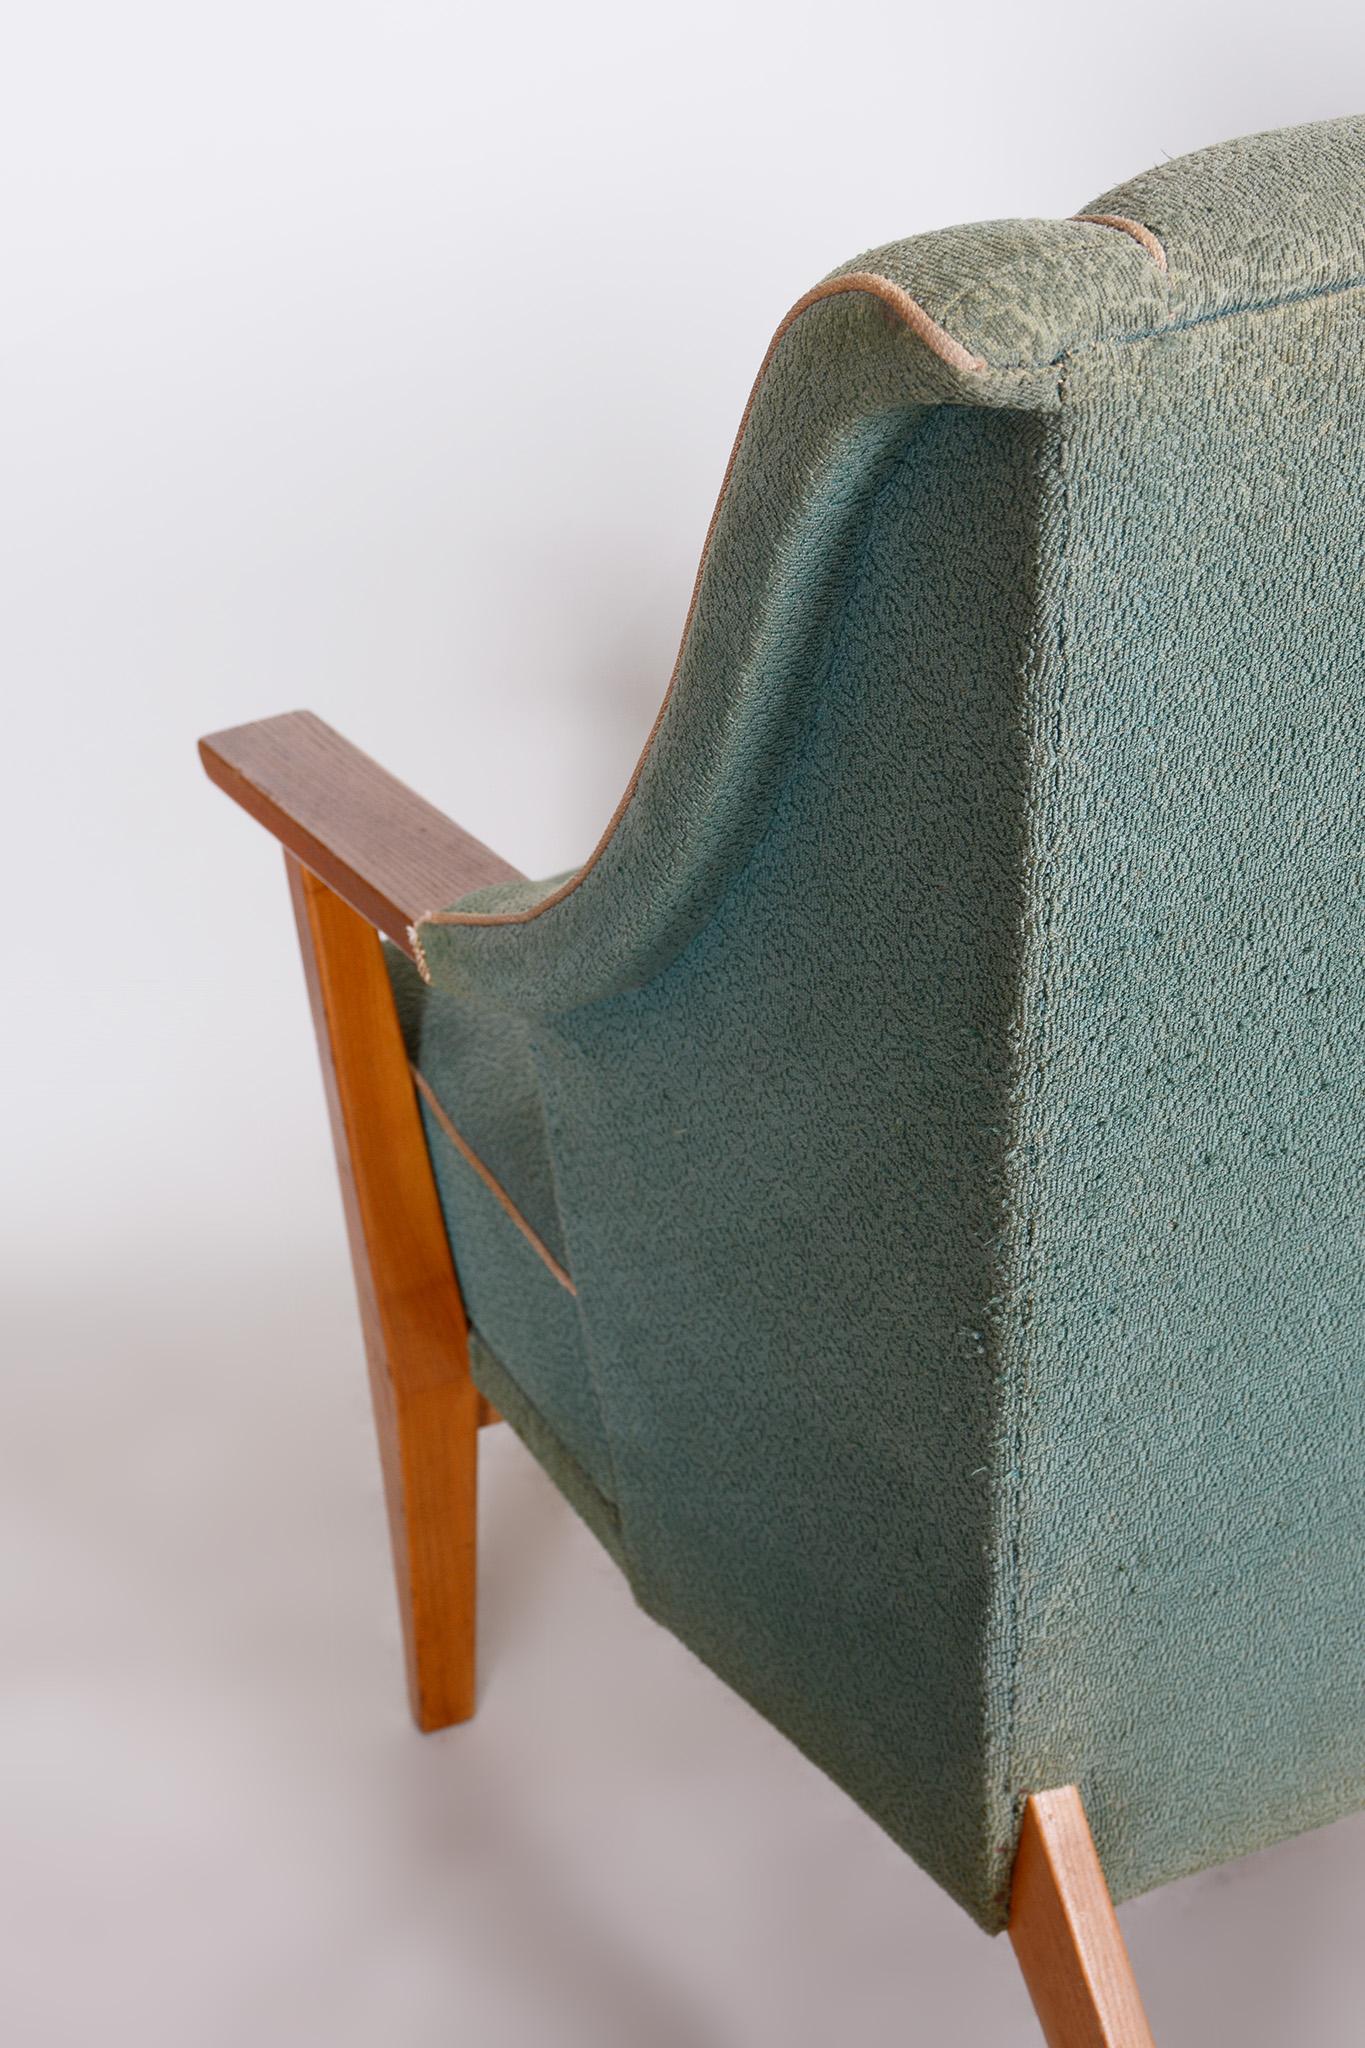 Pair of Unique Green Beech ArtDeco Armchairs Made in 1940s, Denmark For Sale 6